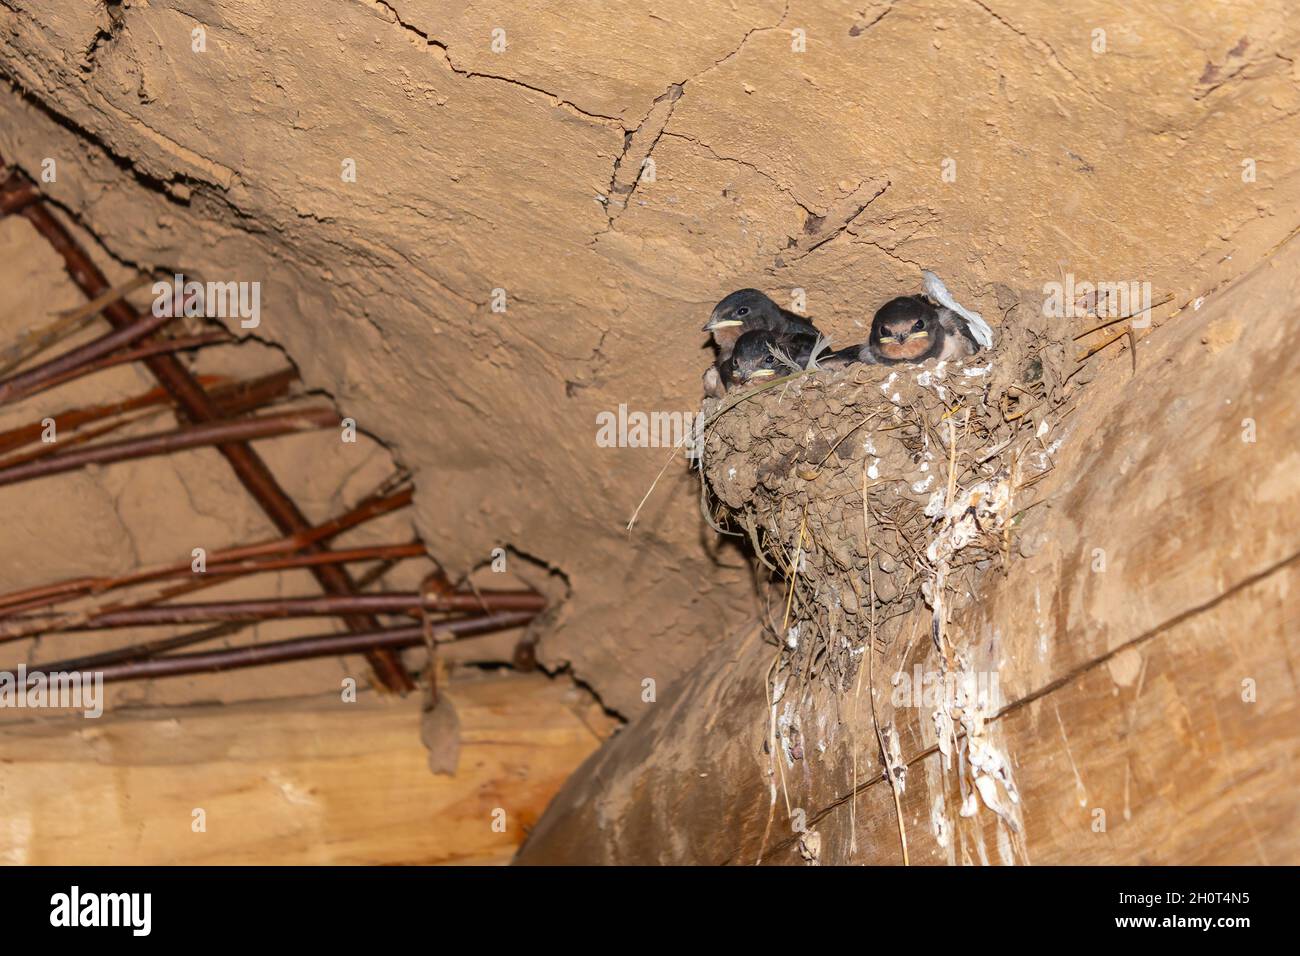 Swallow's nest with baby swallows, in a wooden barn Stock Photo